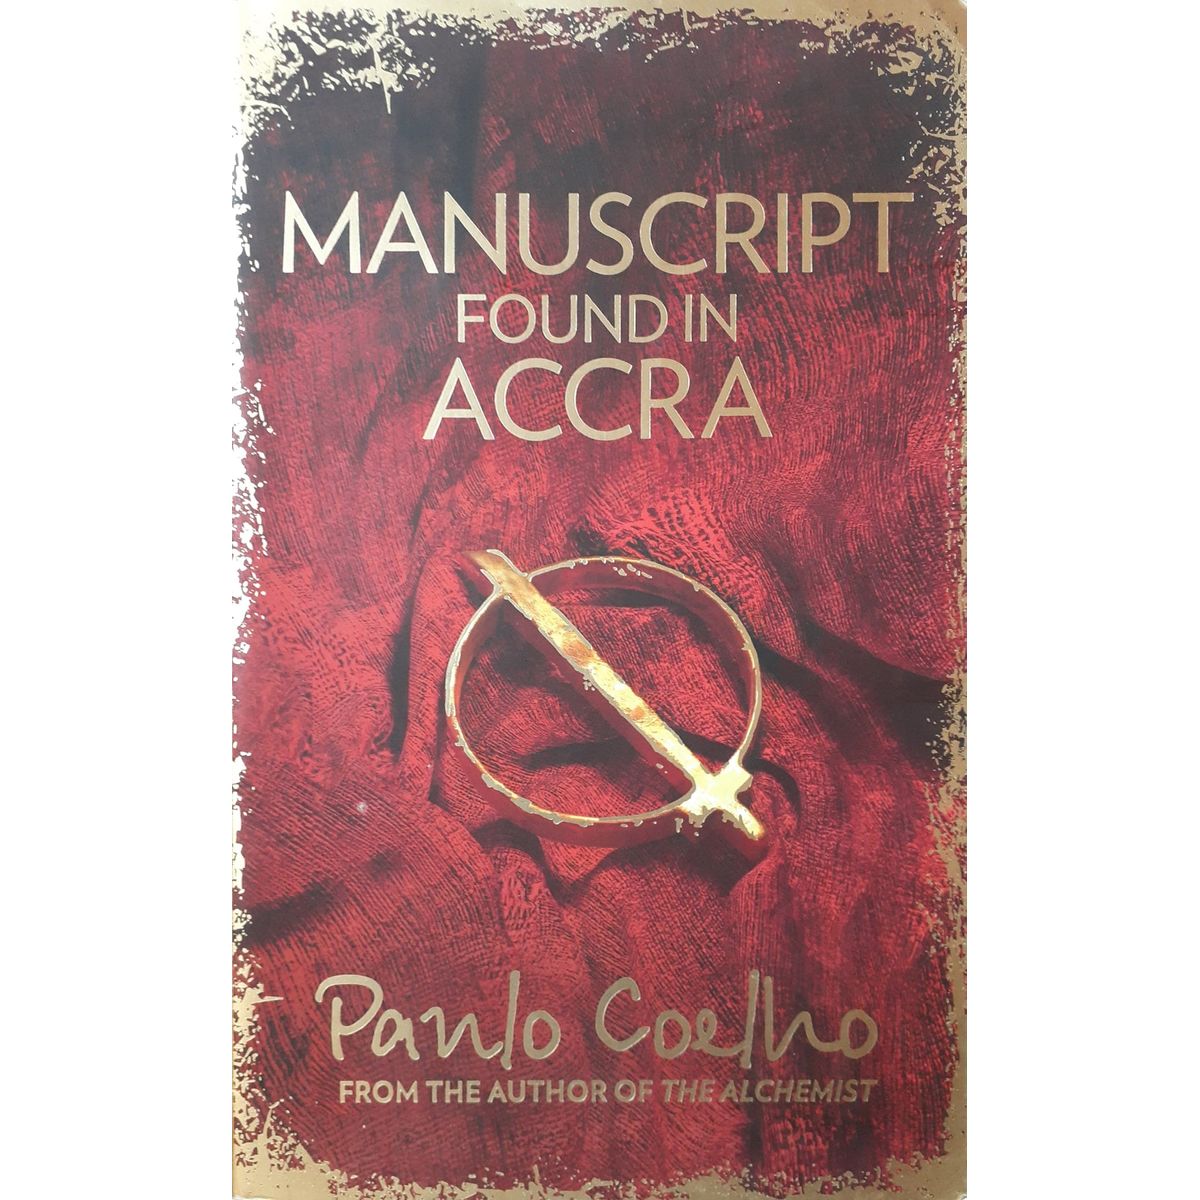 ISBN: 9780007514236 / 0007514239 - Manuscript Found in Accra by Paulo Coelho, translated by Margaret Jull Costa [2013]